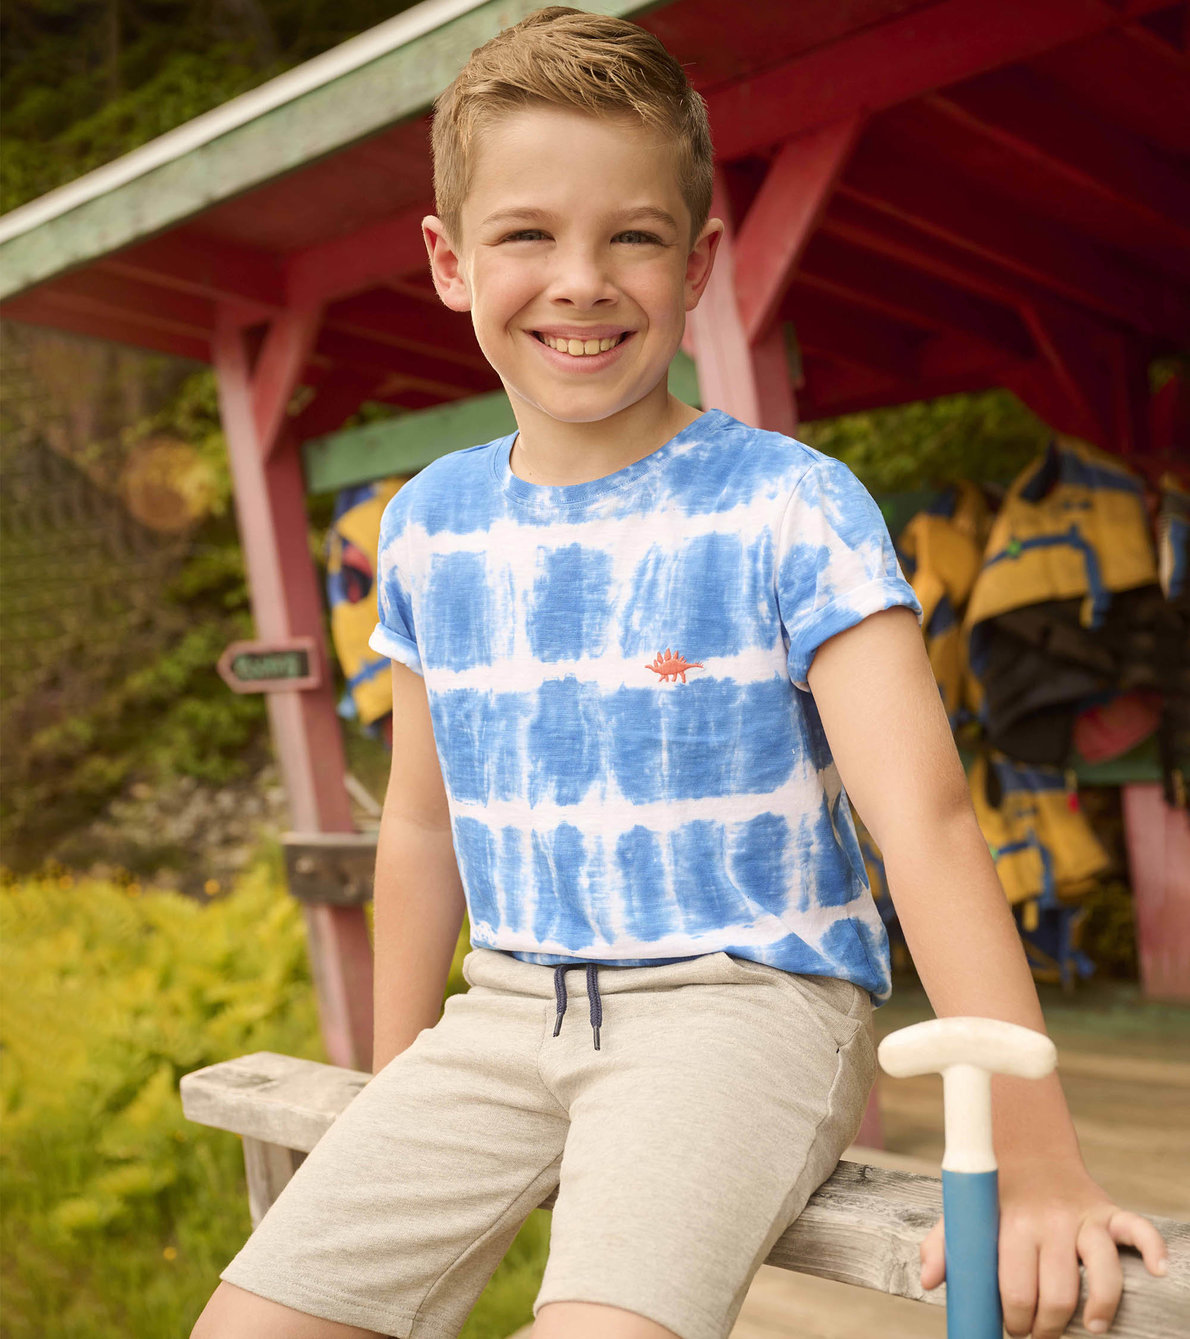 View larger image of Boys Reptile Tie Dye Tee